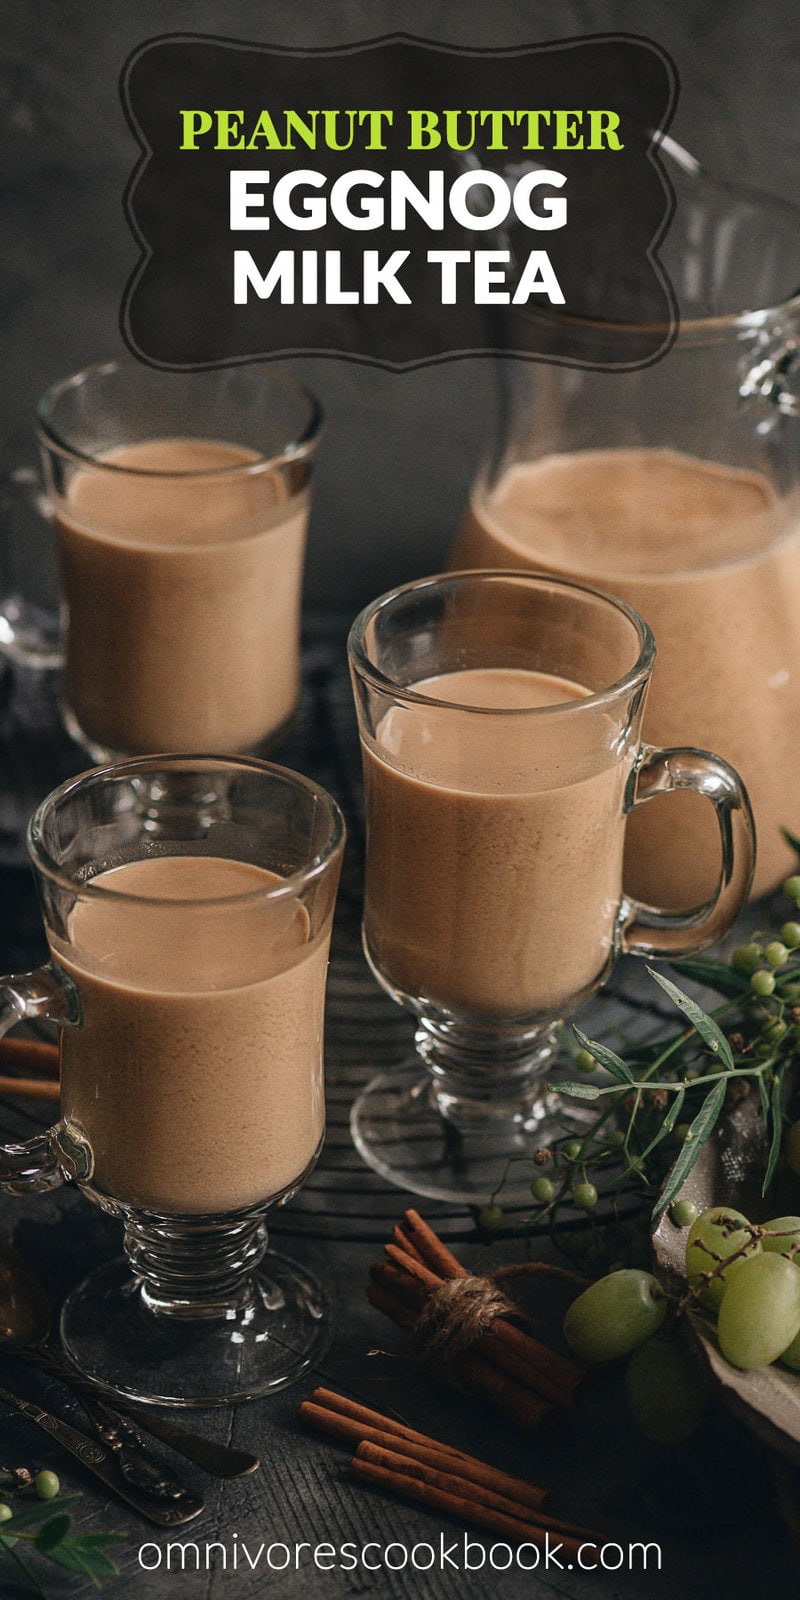 Peanut Butter Eggnog Milk Tea | This Christmas make this nutty creamy peanut butter eggnog milk tea to spice up your party! The recipe includes an easy homemade eggnog recipe. But you can use store-bought eggnog to make it a 3-ingredient recipe that takes no time to put together. The drink tastes somewhere between an Asian boba tea and chai, only tastier and with a silky, creamy texture.